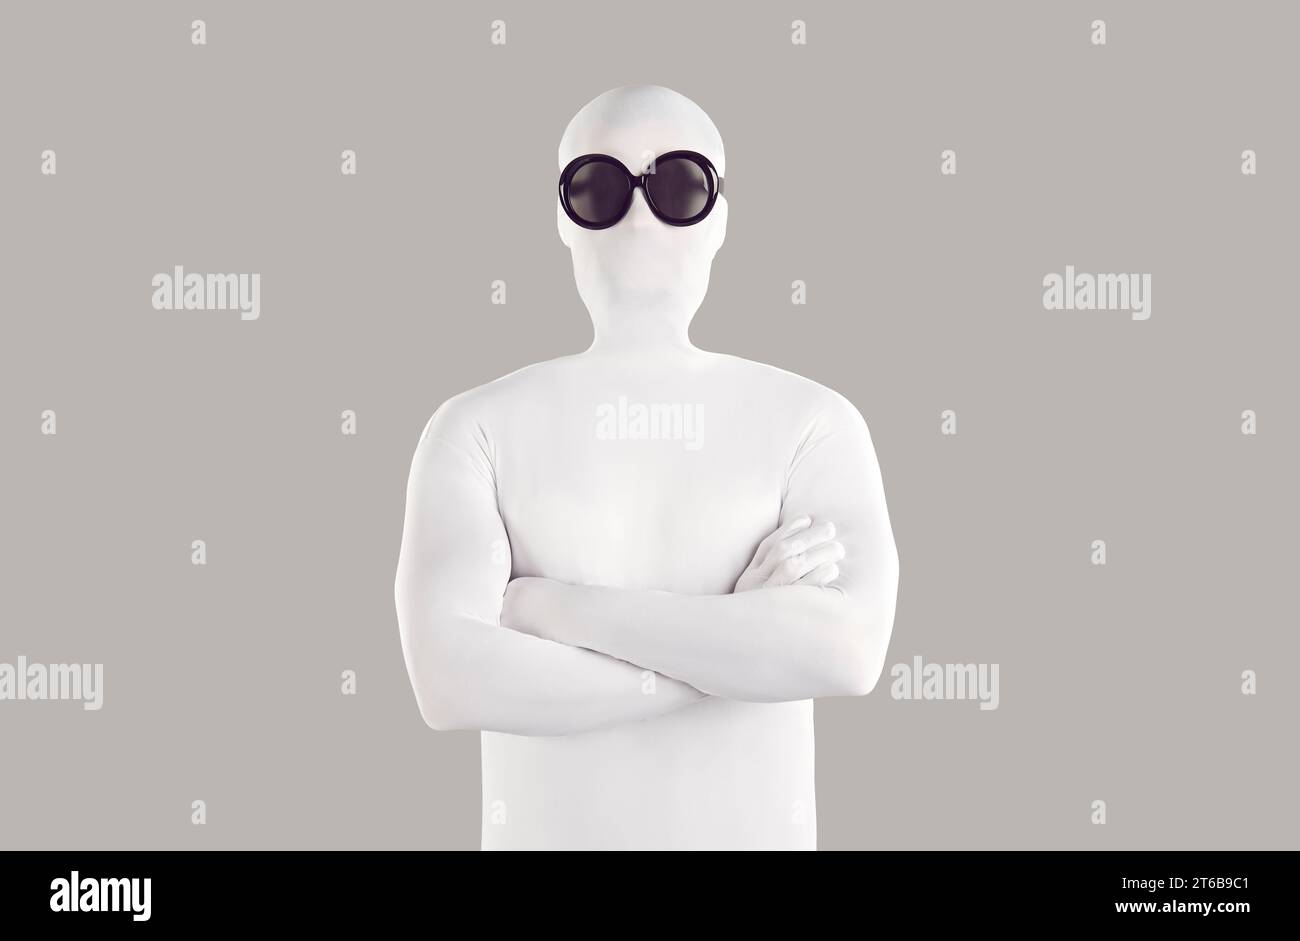 Portrait of man disguised in white bodysuit and black sunglasses standing with folded arms Stock Photo